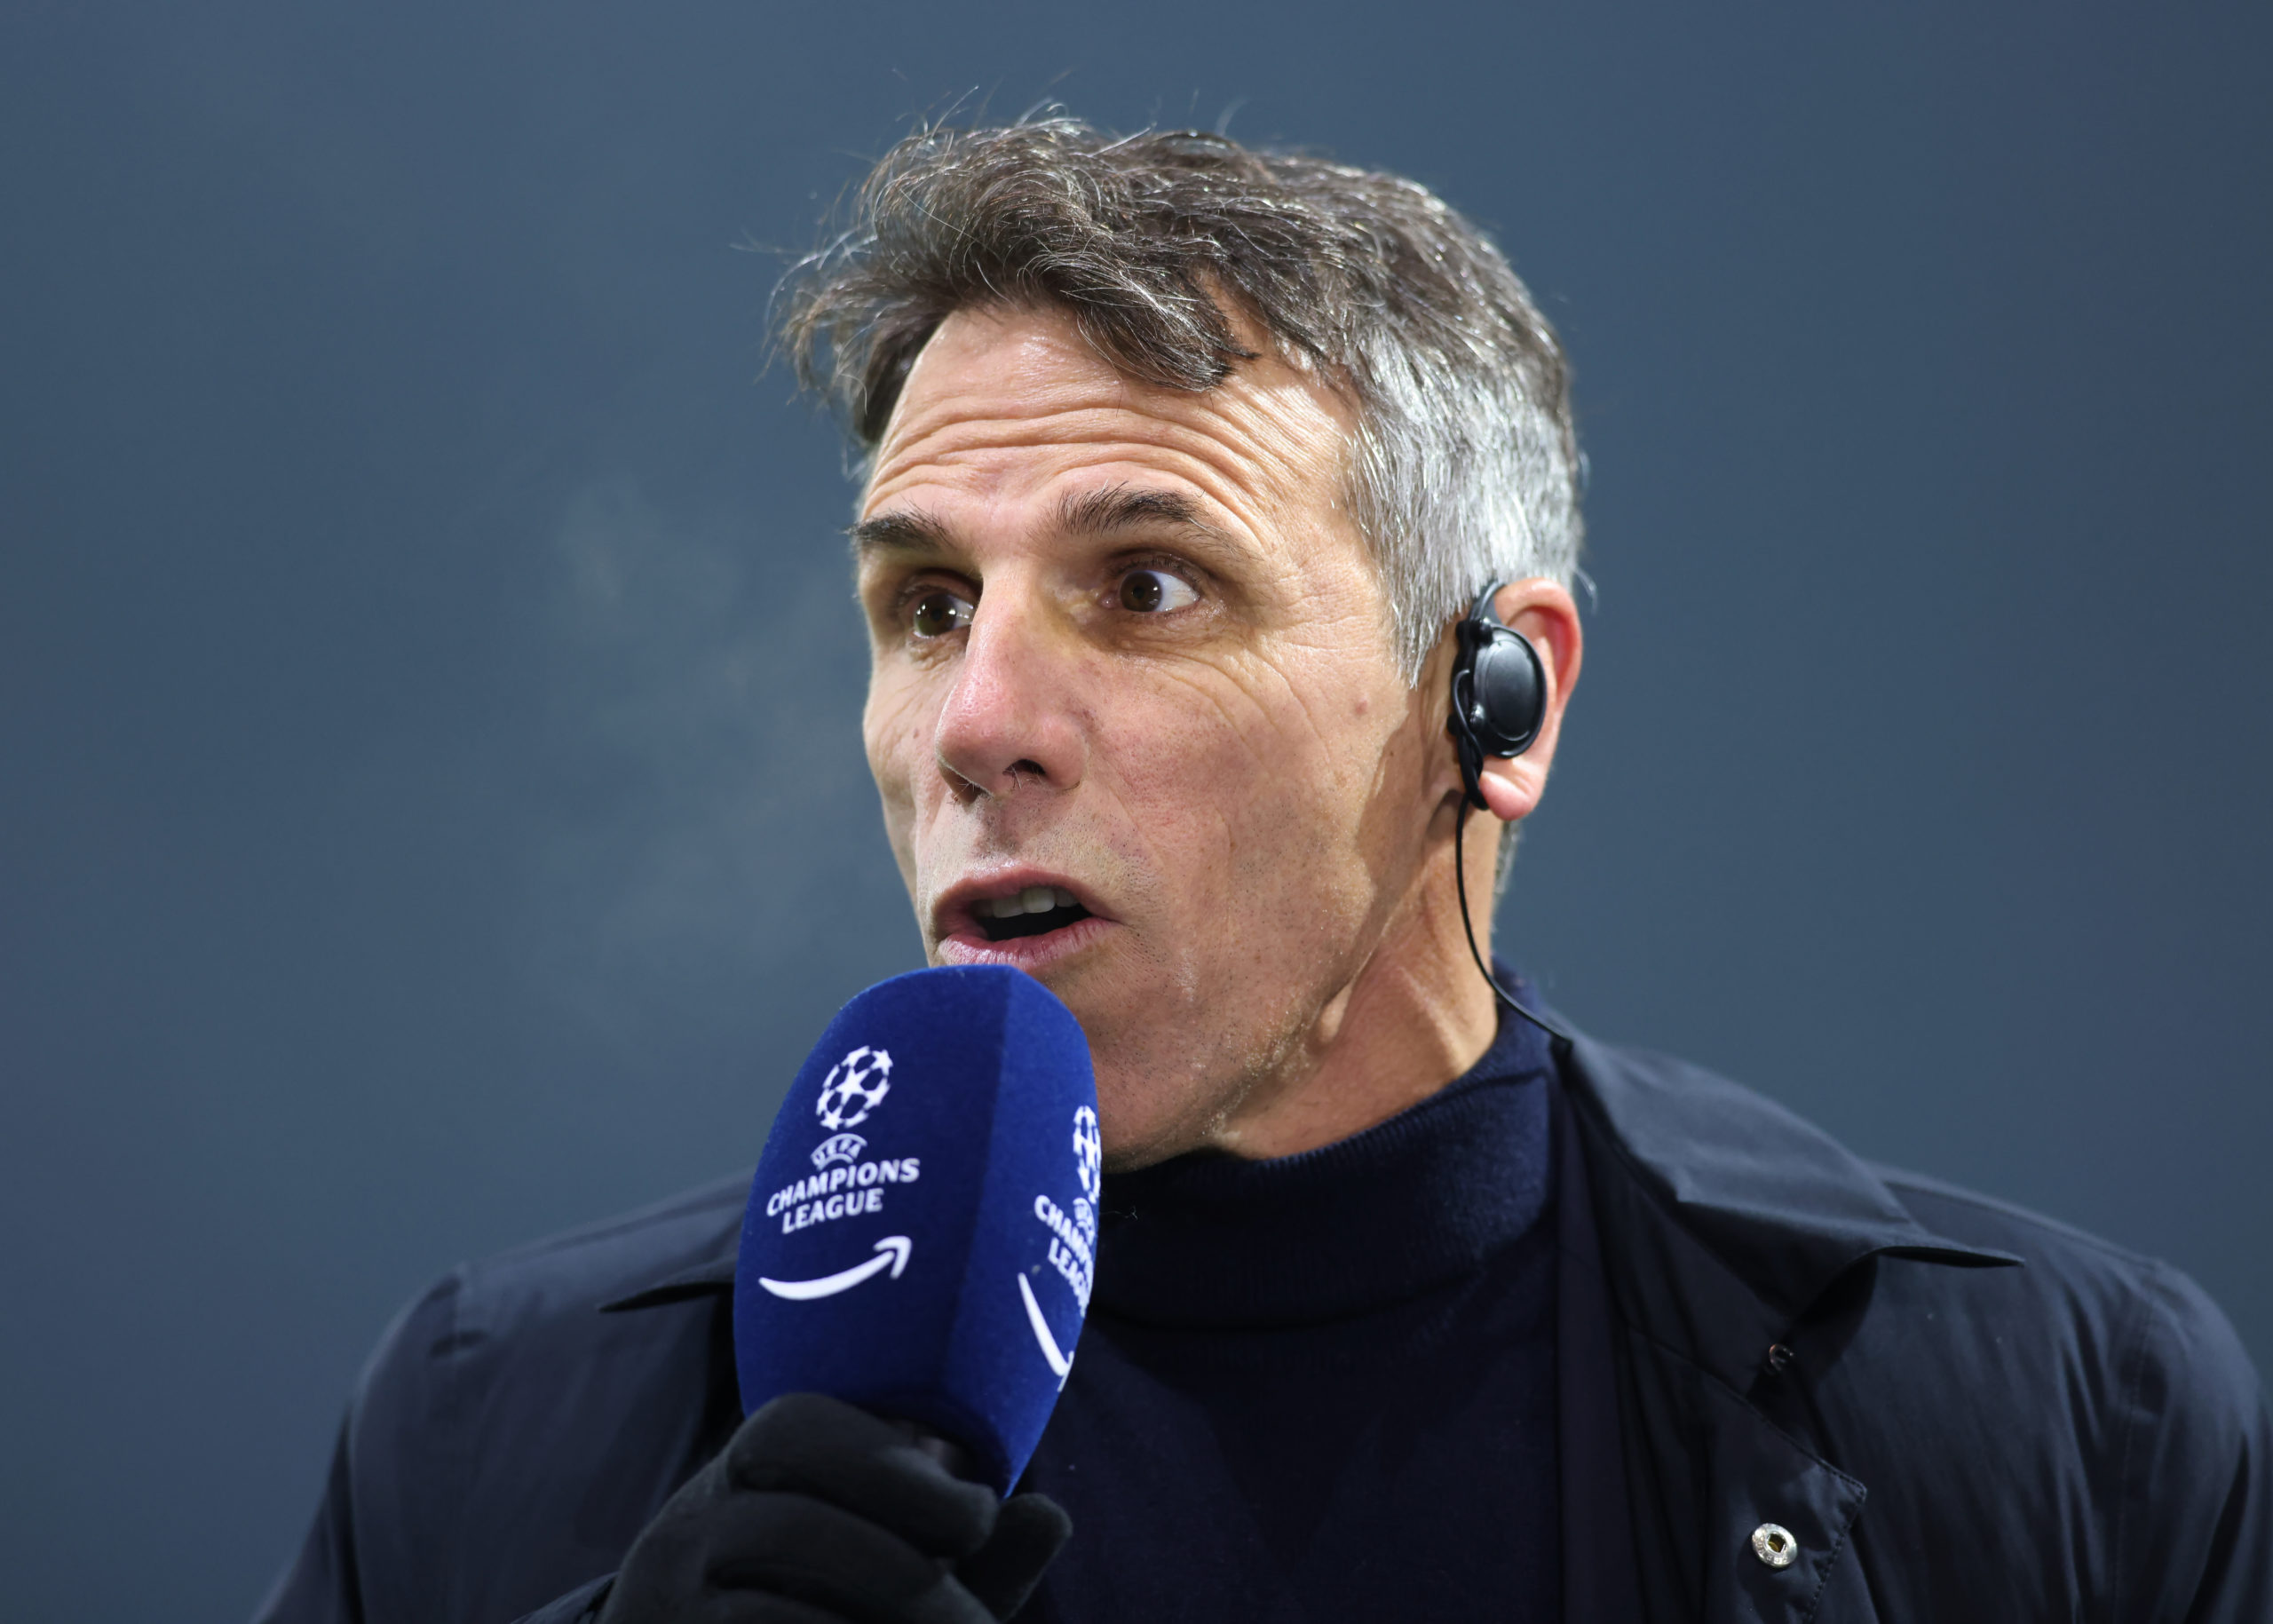 'I would': Zola suggests Chelsea should keep their 25-year-old player next season